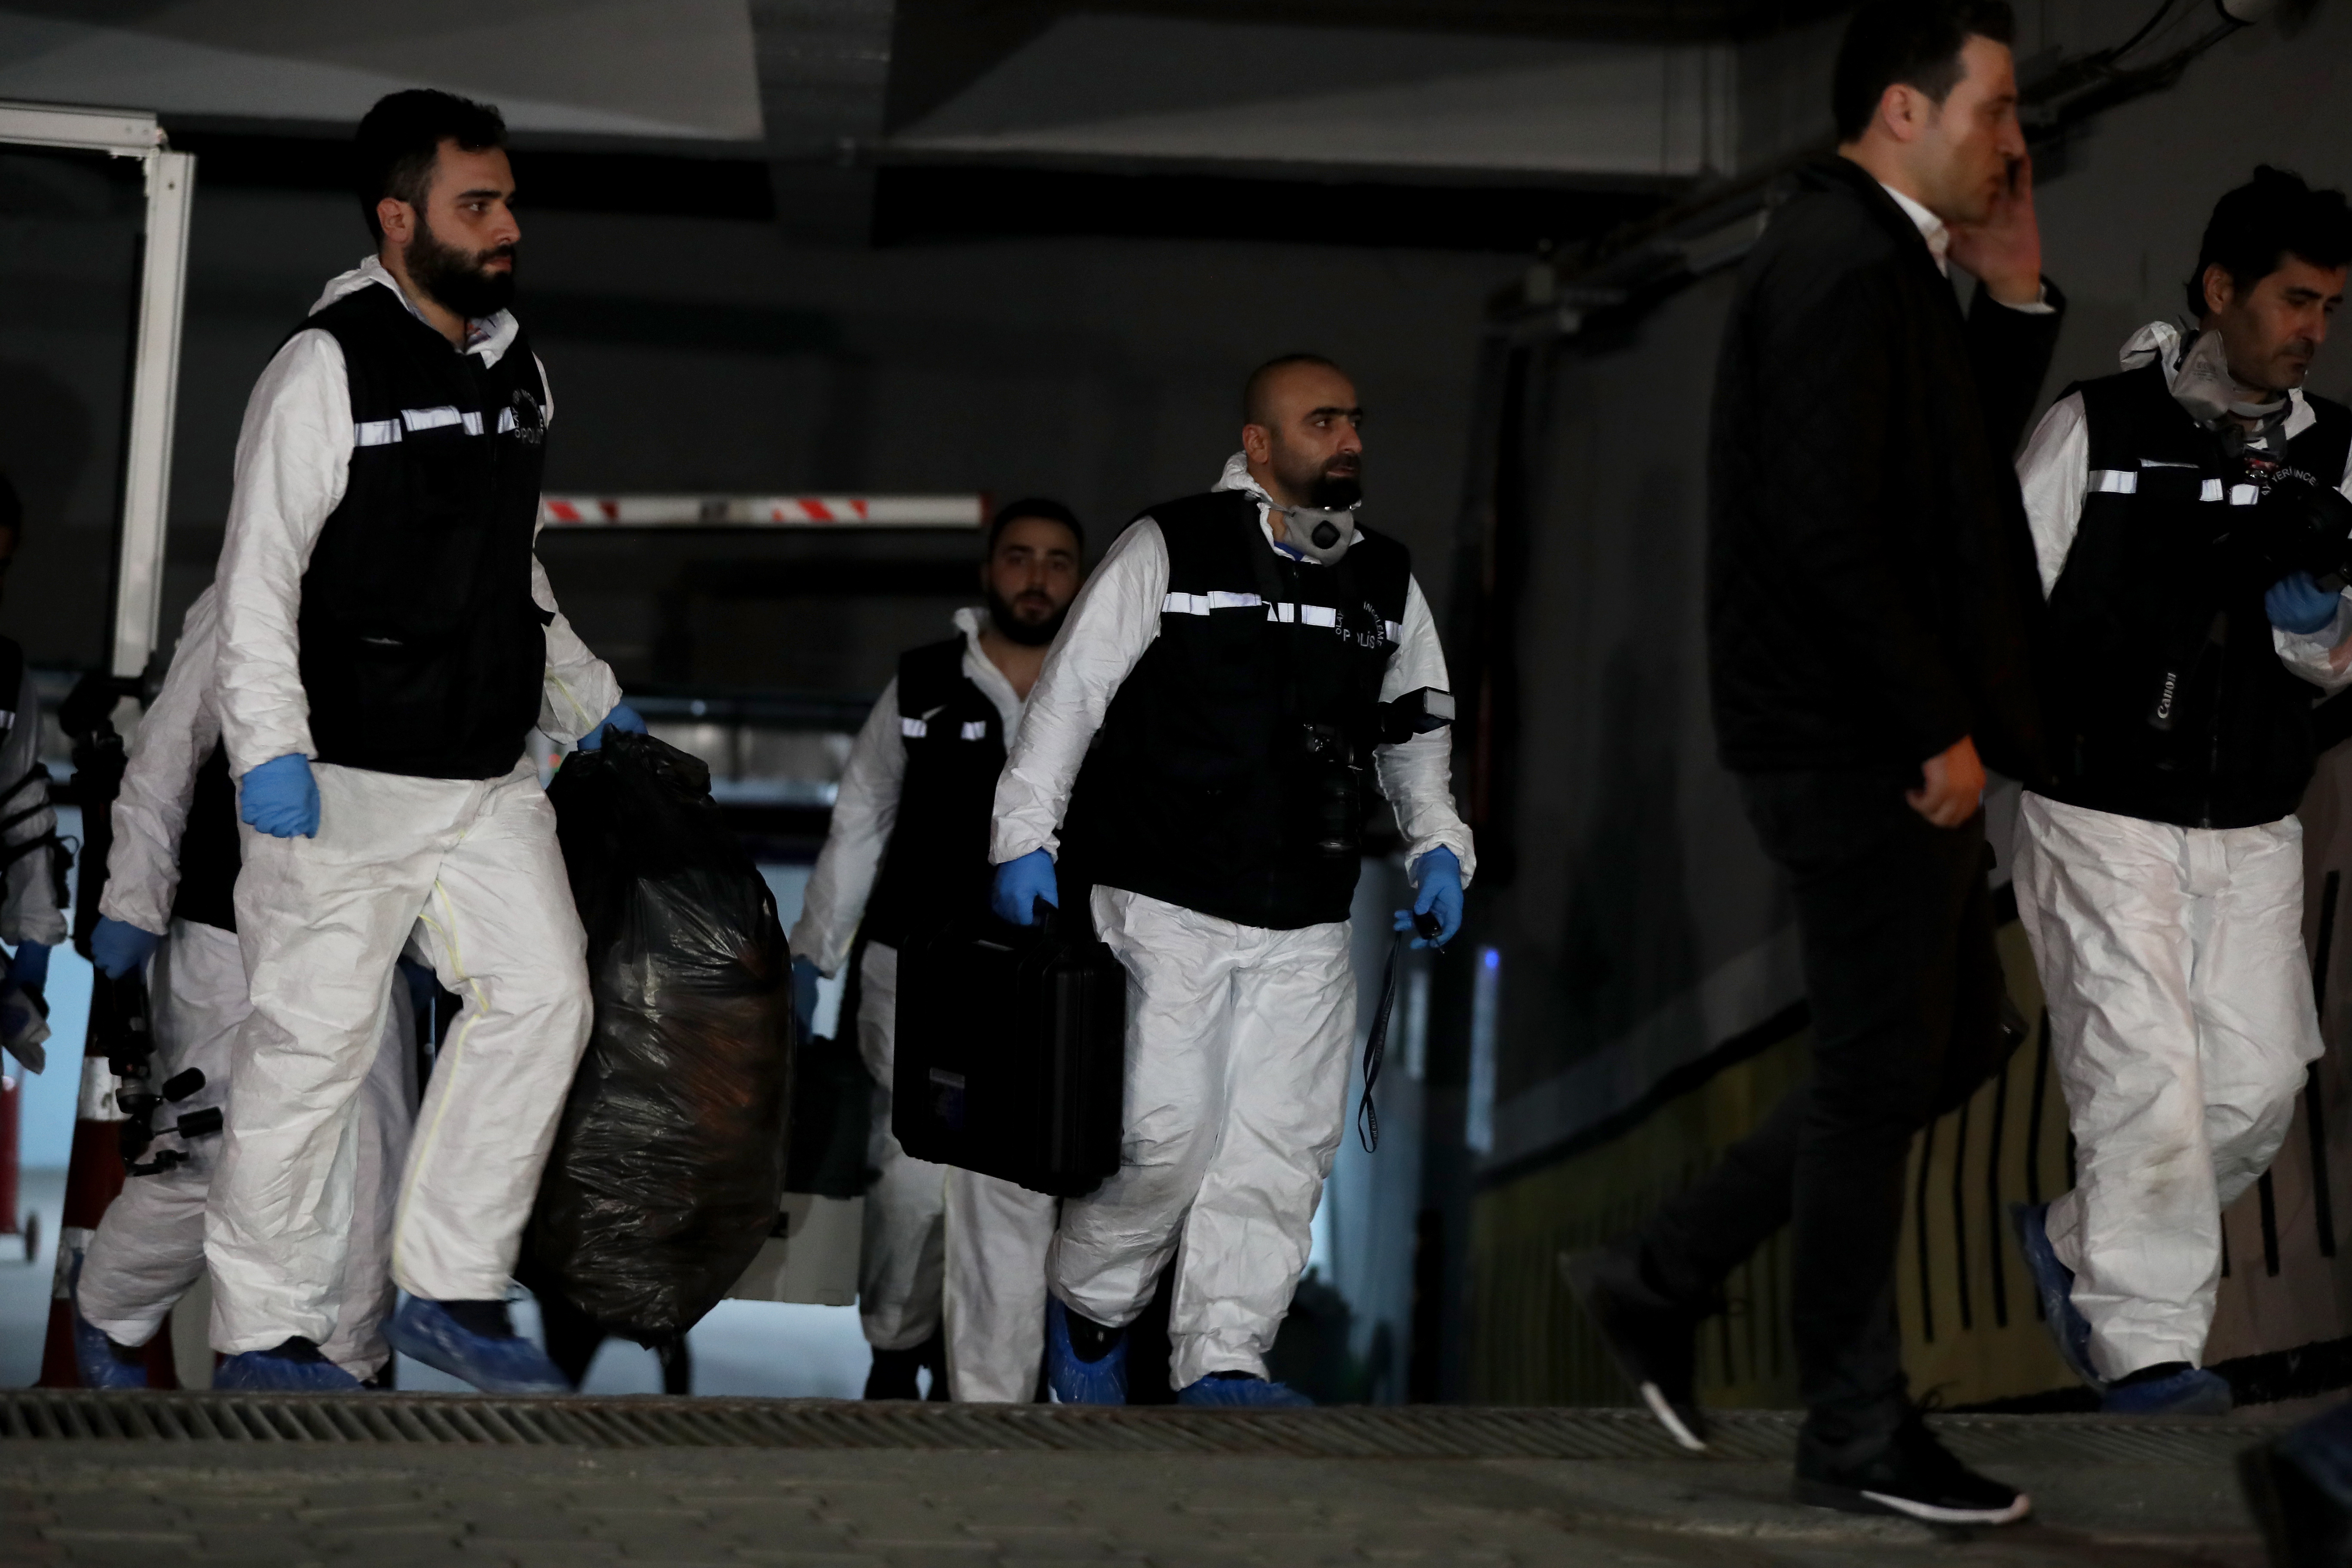 epa07113890 Forensic police officers leave after searching a diplomatic car belonging to the Saudi consulate as part of investigations in the killing of Saudi journalist Jamal Khashoggi in Istanbul, Turkey, 23 October 2018. Reports state Turkish President Recep Tayyip Erdogan said on 23 October that murder of Saudi journalist Jamal Khashoggi at his country's consulate in Istanbul was premeditated and requested the Arab kingdom hand over those responsible to face trial in Turkey. Saudi Arabian official media on 19 October reported that Khashoggi died as a result of a physical altercation inside the kingdom's consulate in Istanbul, where he was last seen entering on 02 October for routine paperwork.  EPA/TOLGA BOZOGLU